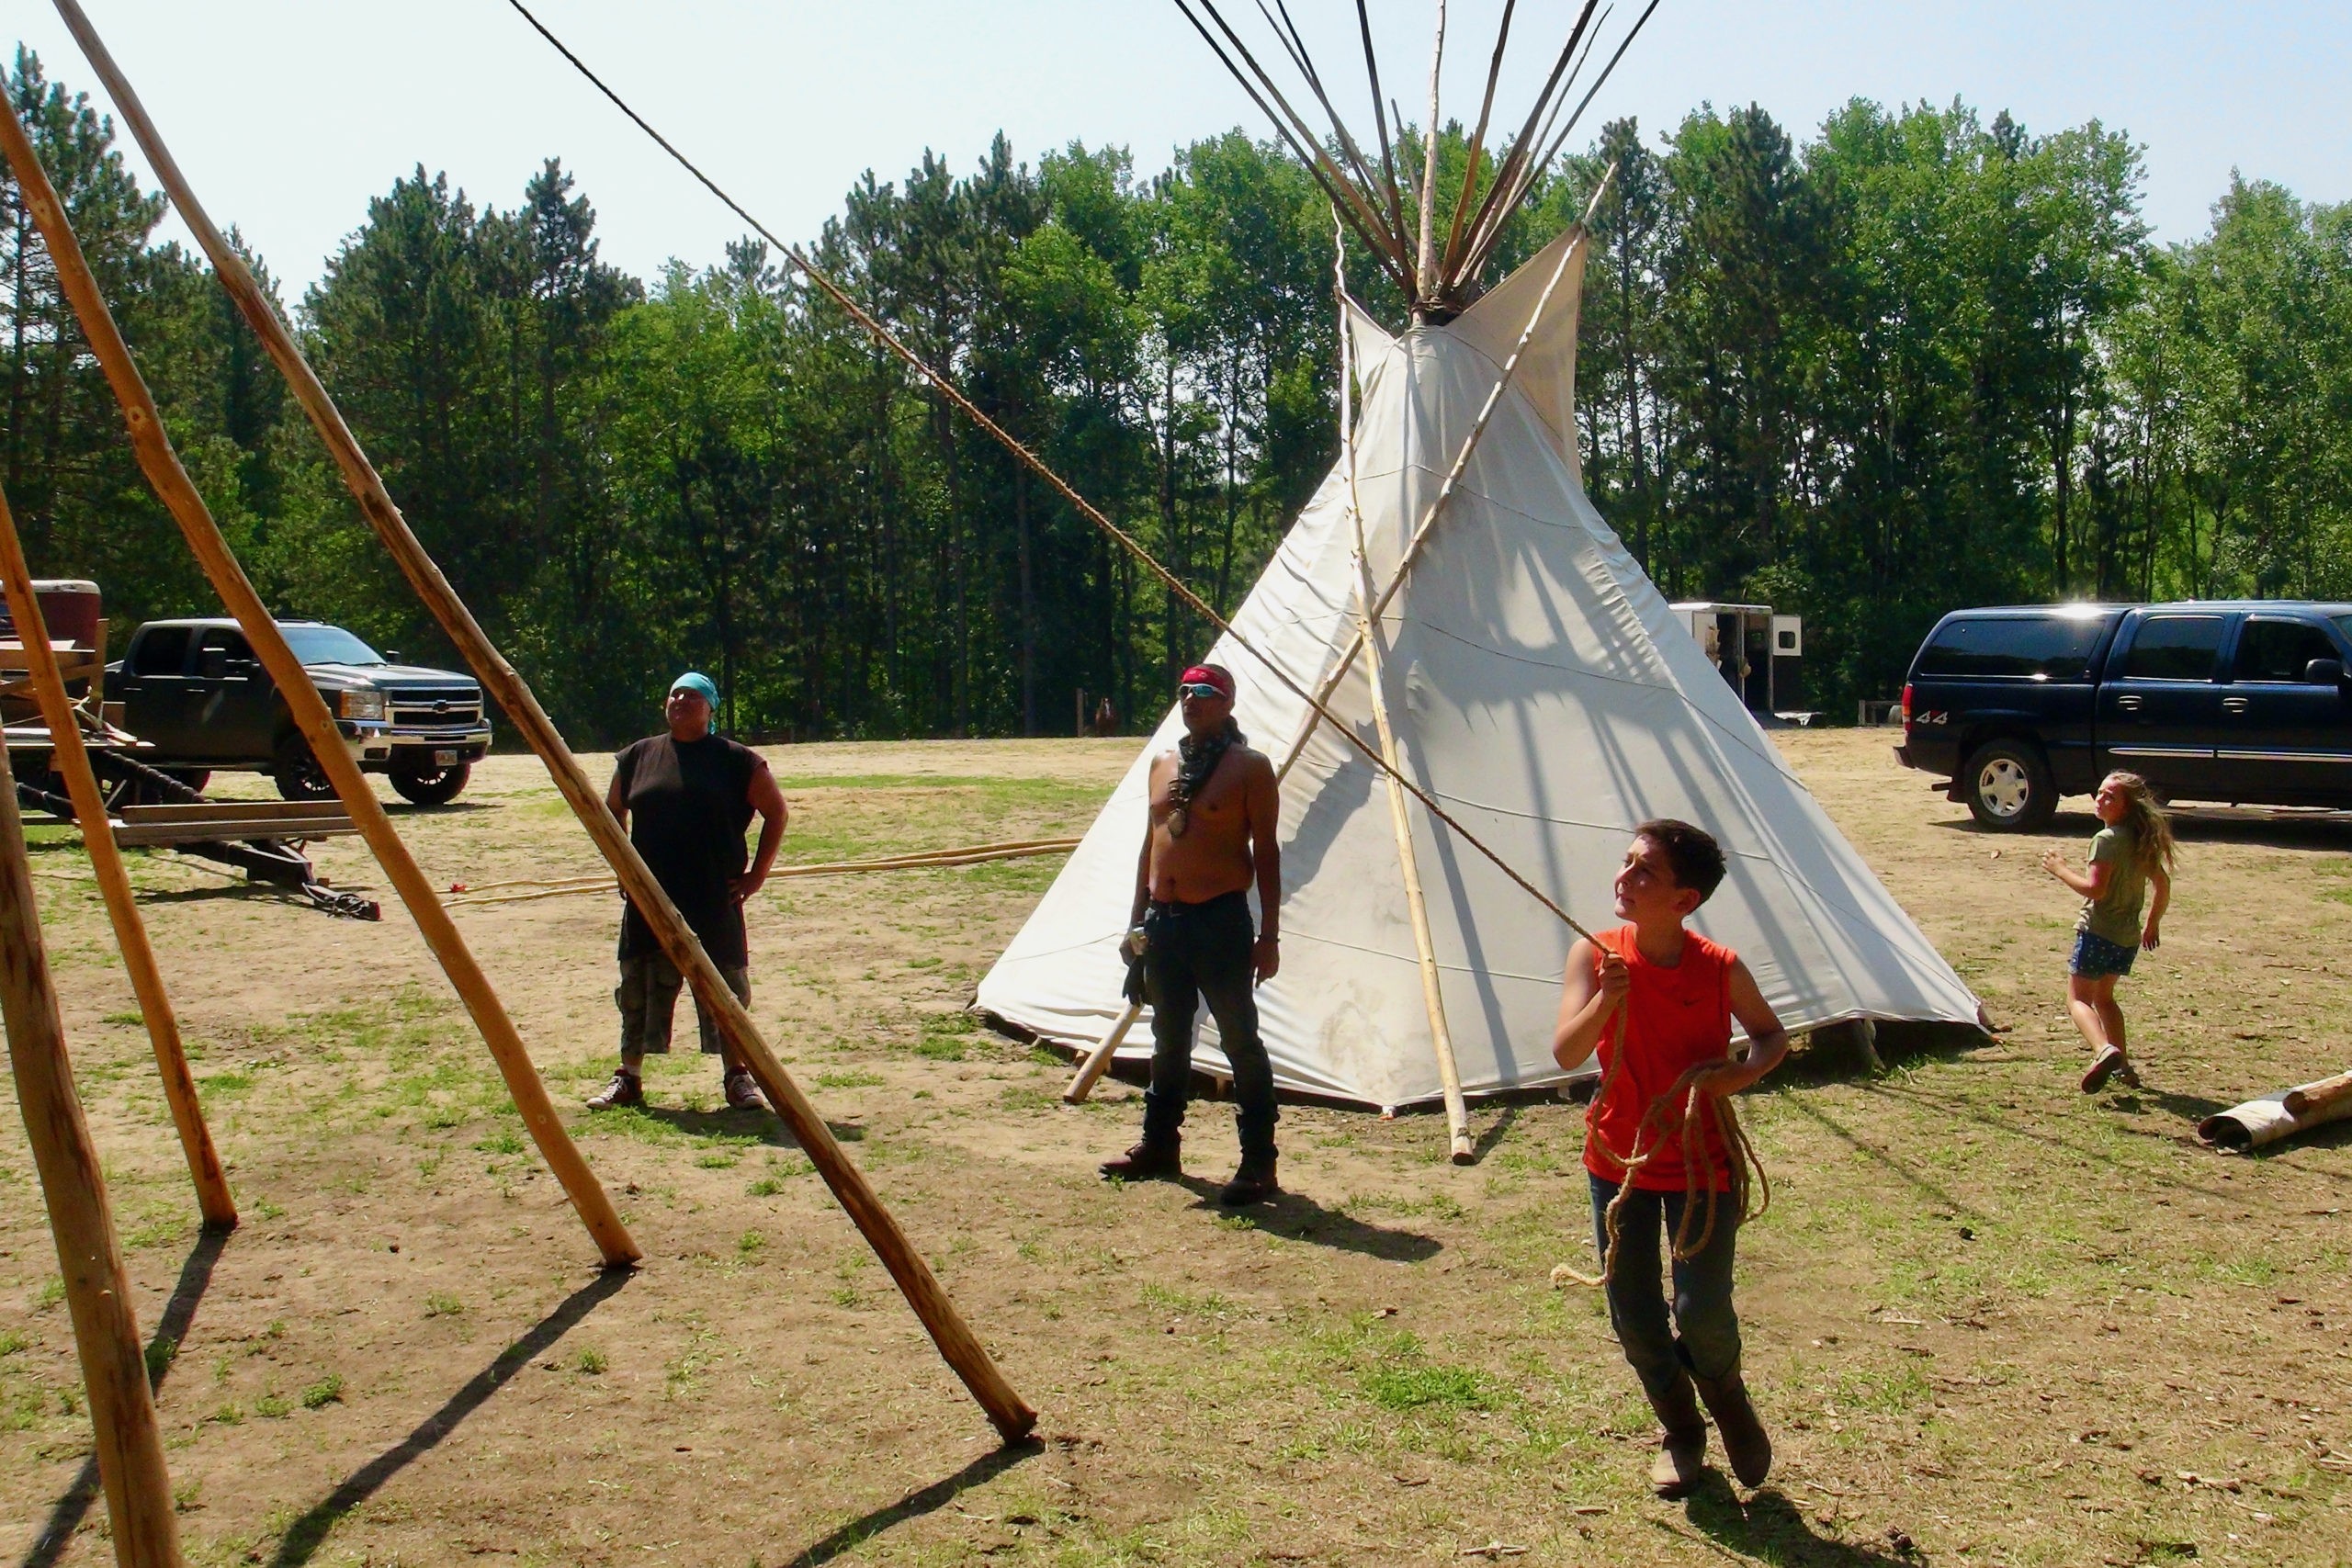 Jim Northrup III teaching youth how to erect a tipi at the Shell City Horse Camp. Sawyer tries his hand as a rope runner.